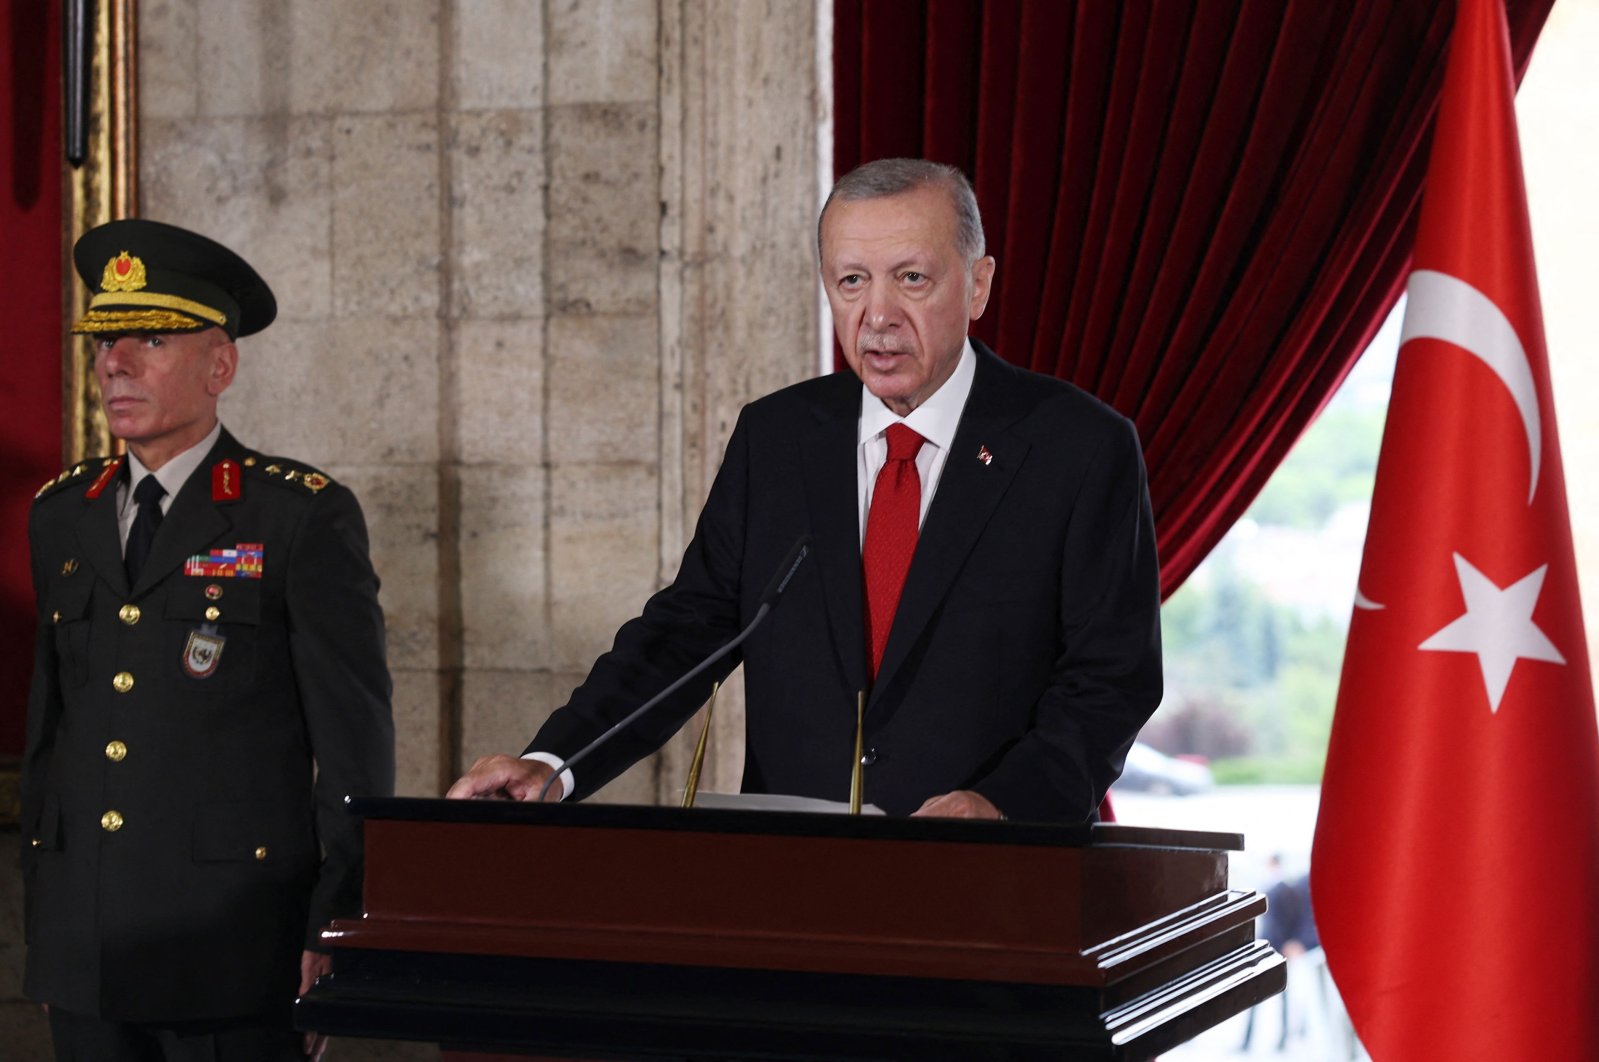 President Recep Tayyip Erdoğan delivers a speech after a visit with members of his new cabinet to Anıtkabir, the mausoleum of the founder of the Republic of Türkiye, Mustafa Kemal Atatürk, before their first cabinet meeting in Ankara, June 6, 2023. (AFP Photo)